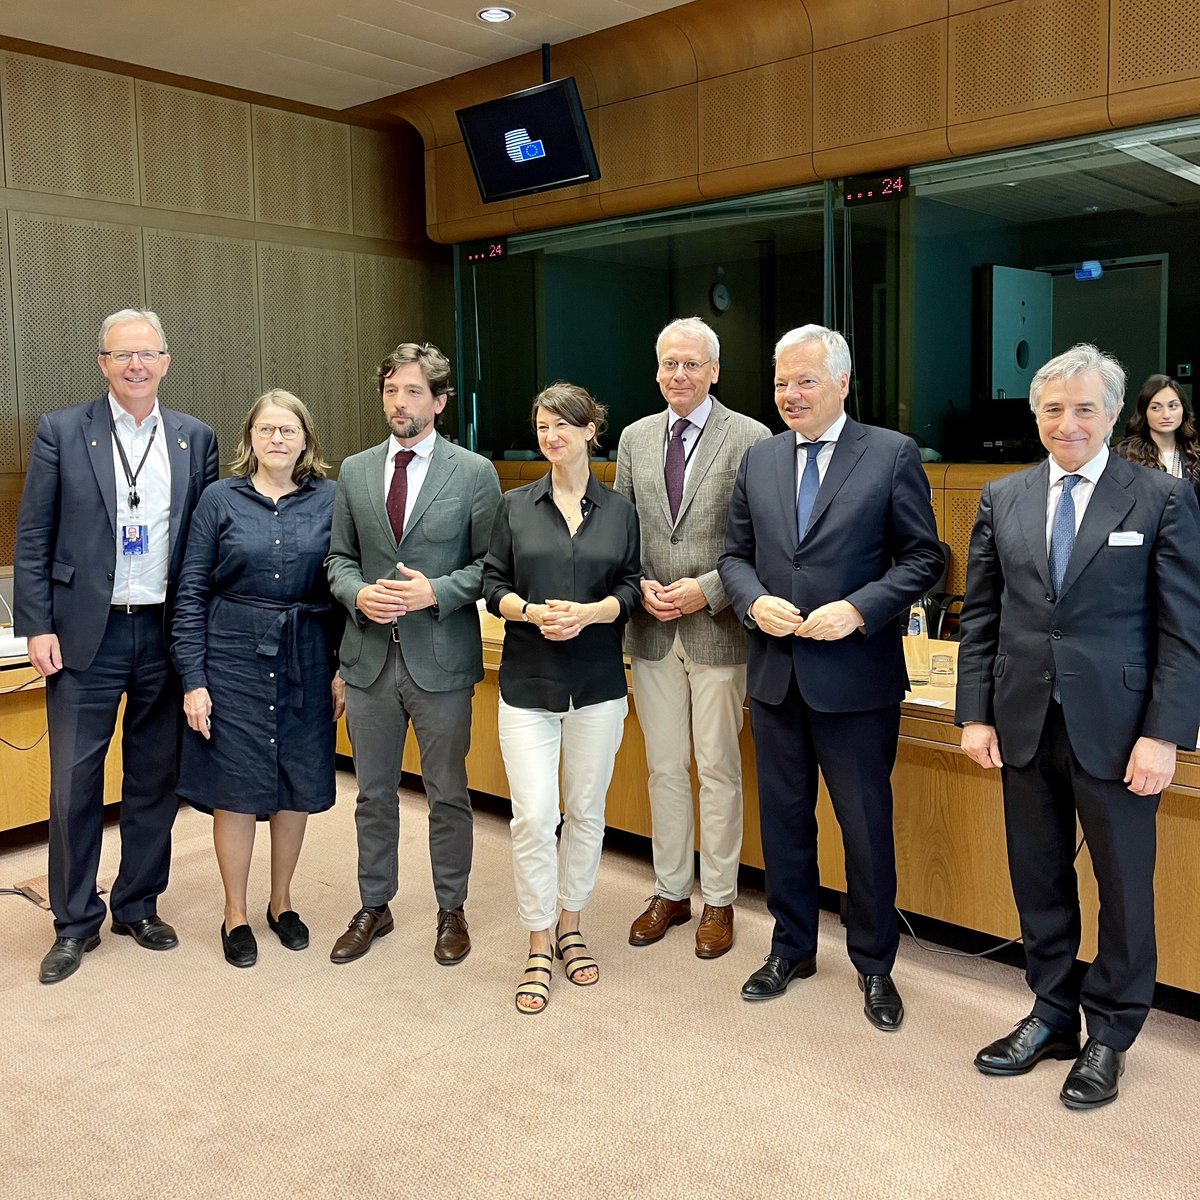 #TRILOGUE | This morning, @EUCouncil and @Europarl_EN negotiators met for a first trilogue on corporate sustainability due diligence.

The incoming Spanish presidency will continue work on this directive.

#EU2023SE